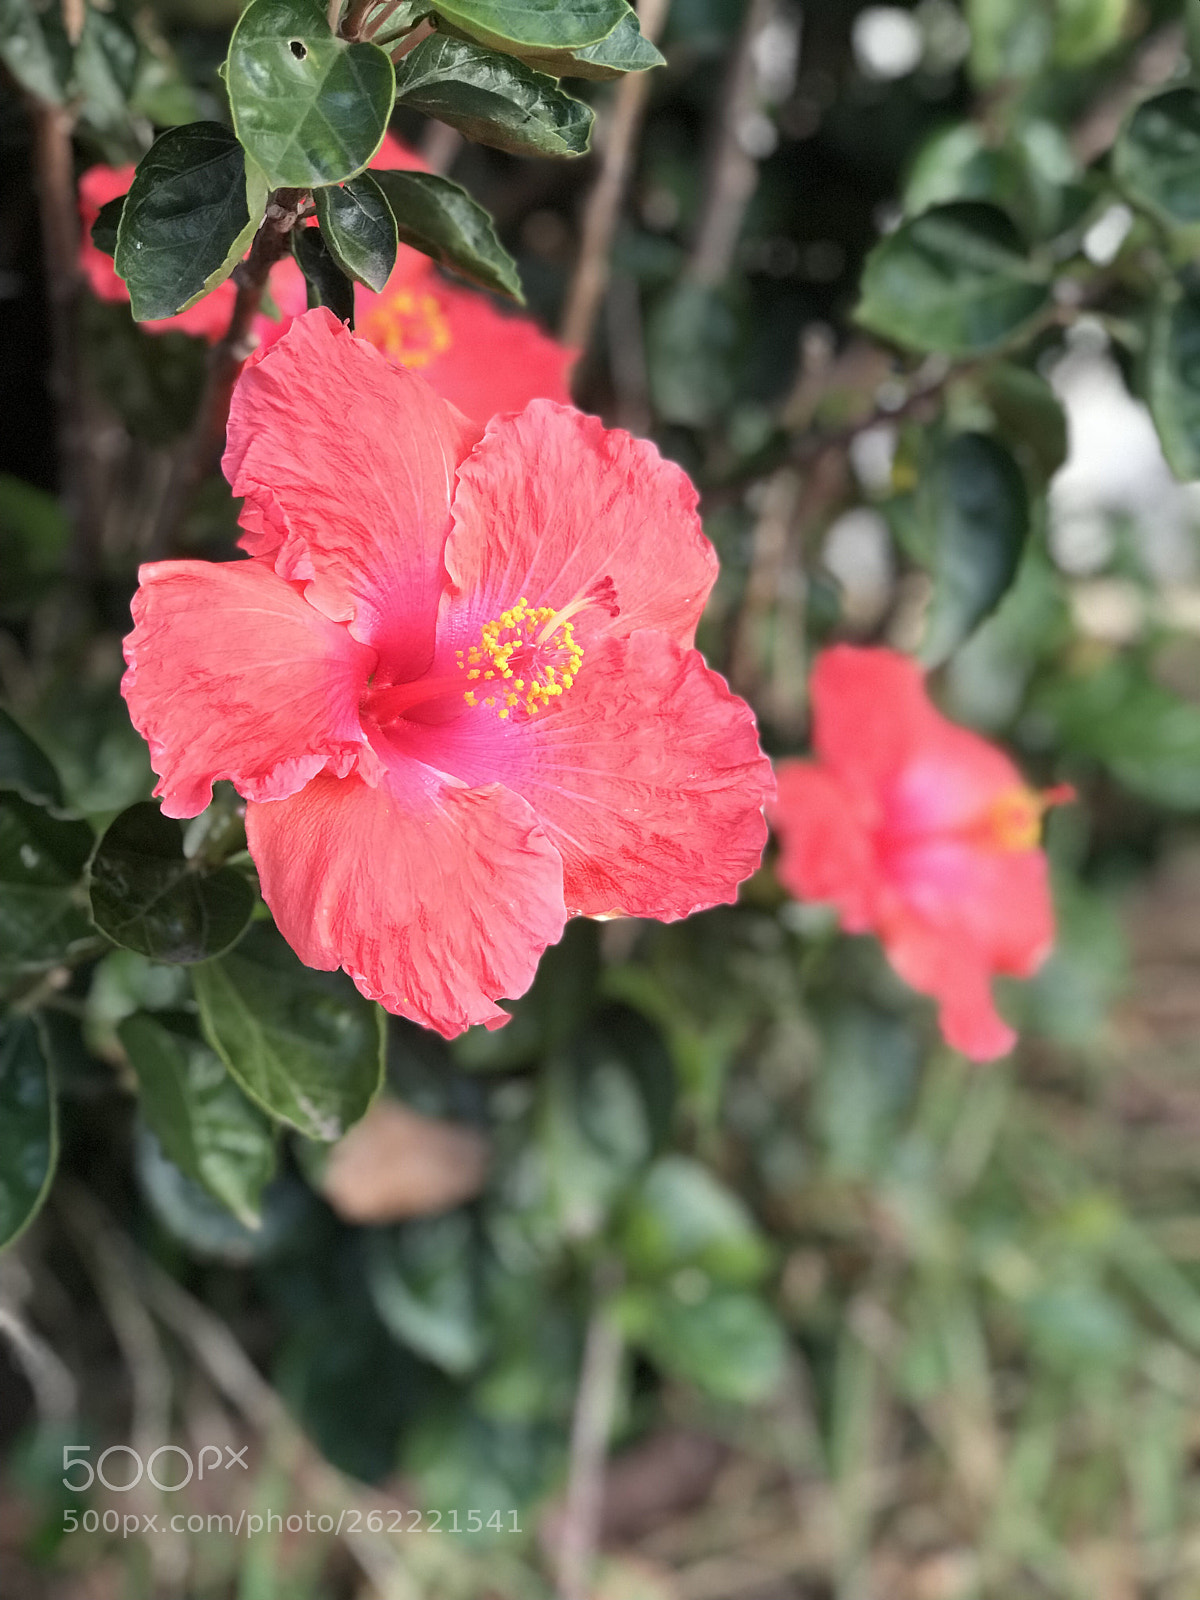 Apple iPhone 7 Plus sample photo. Happiness blooms from within photography